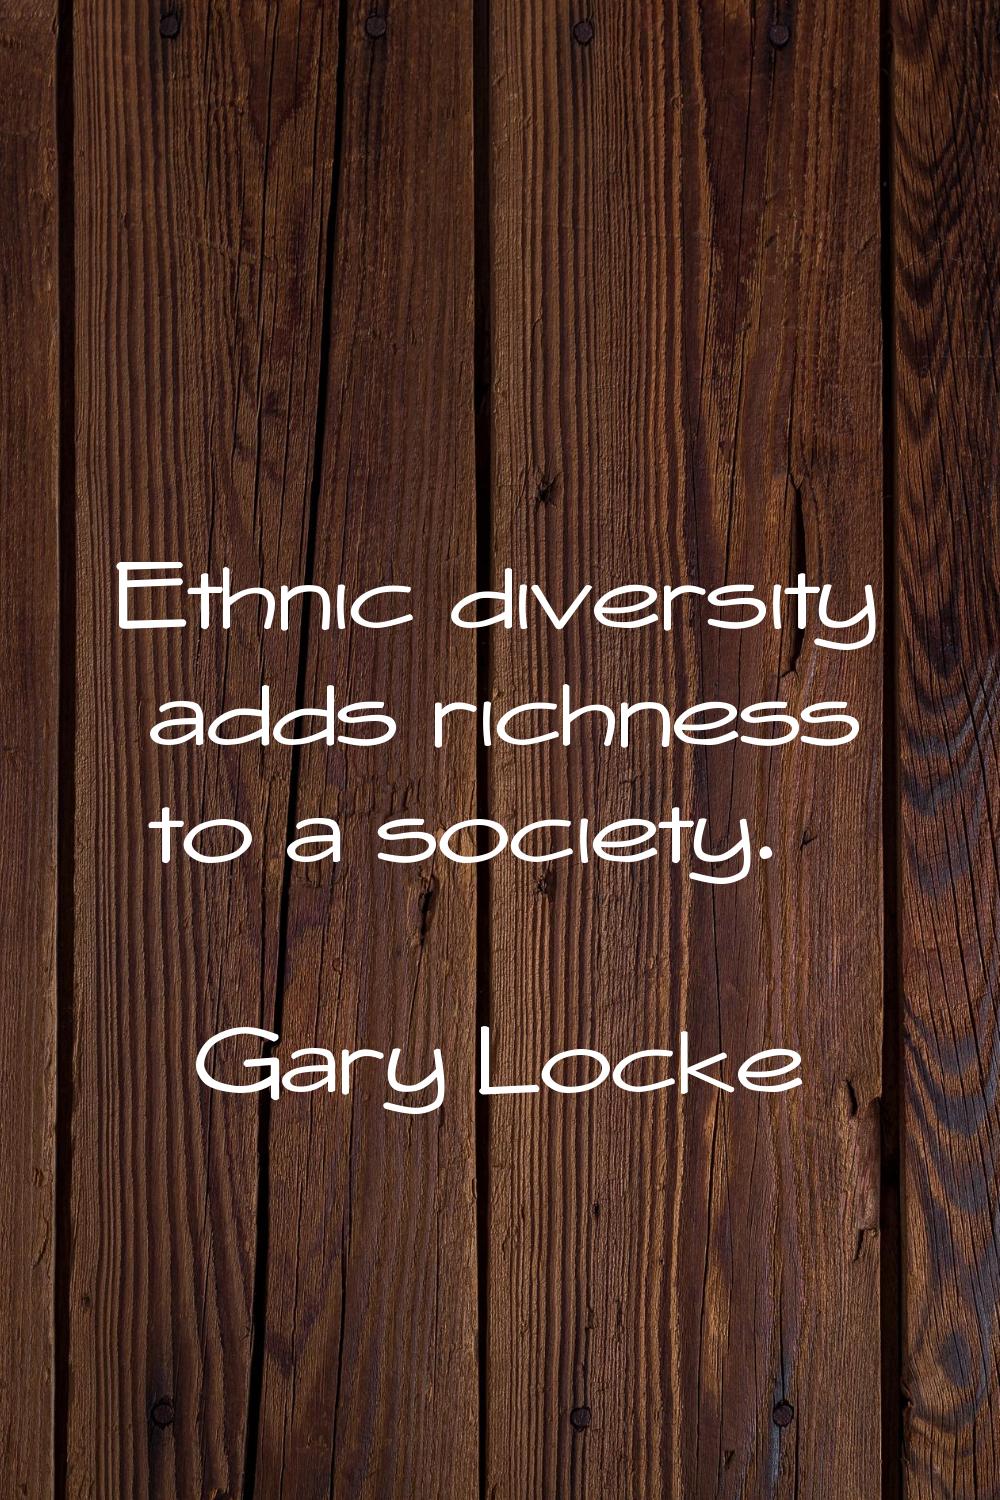 Ethnic diversity adds richness to a society.